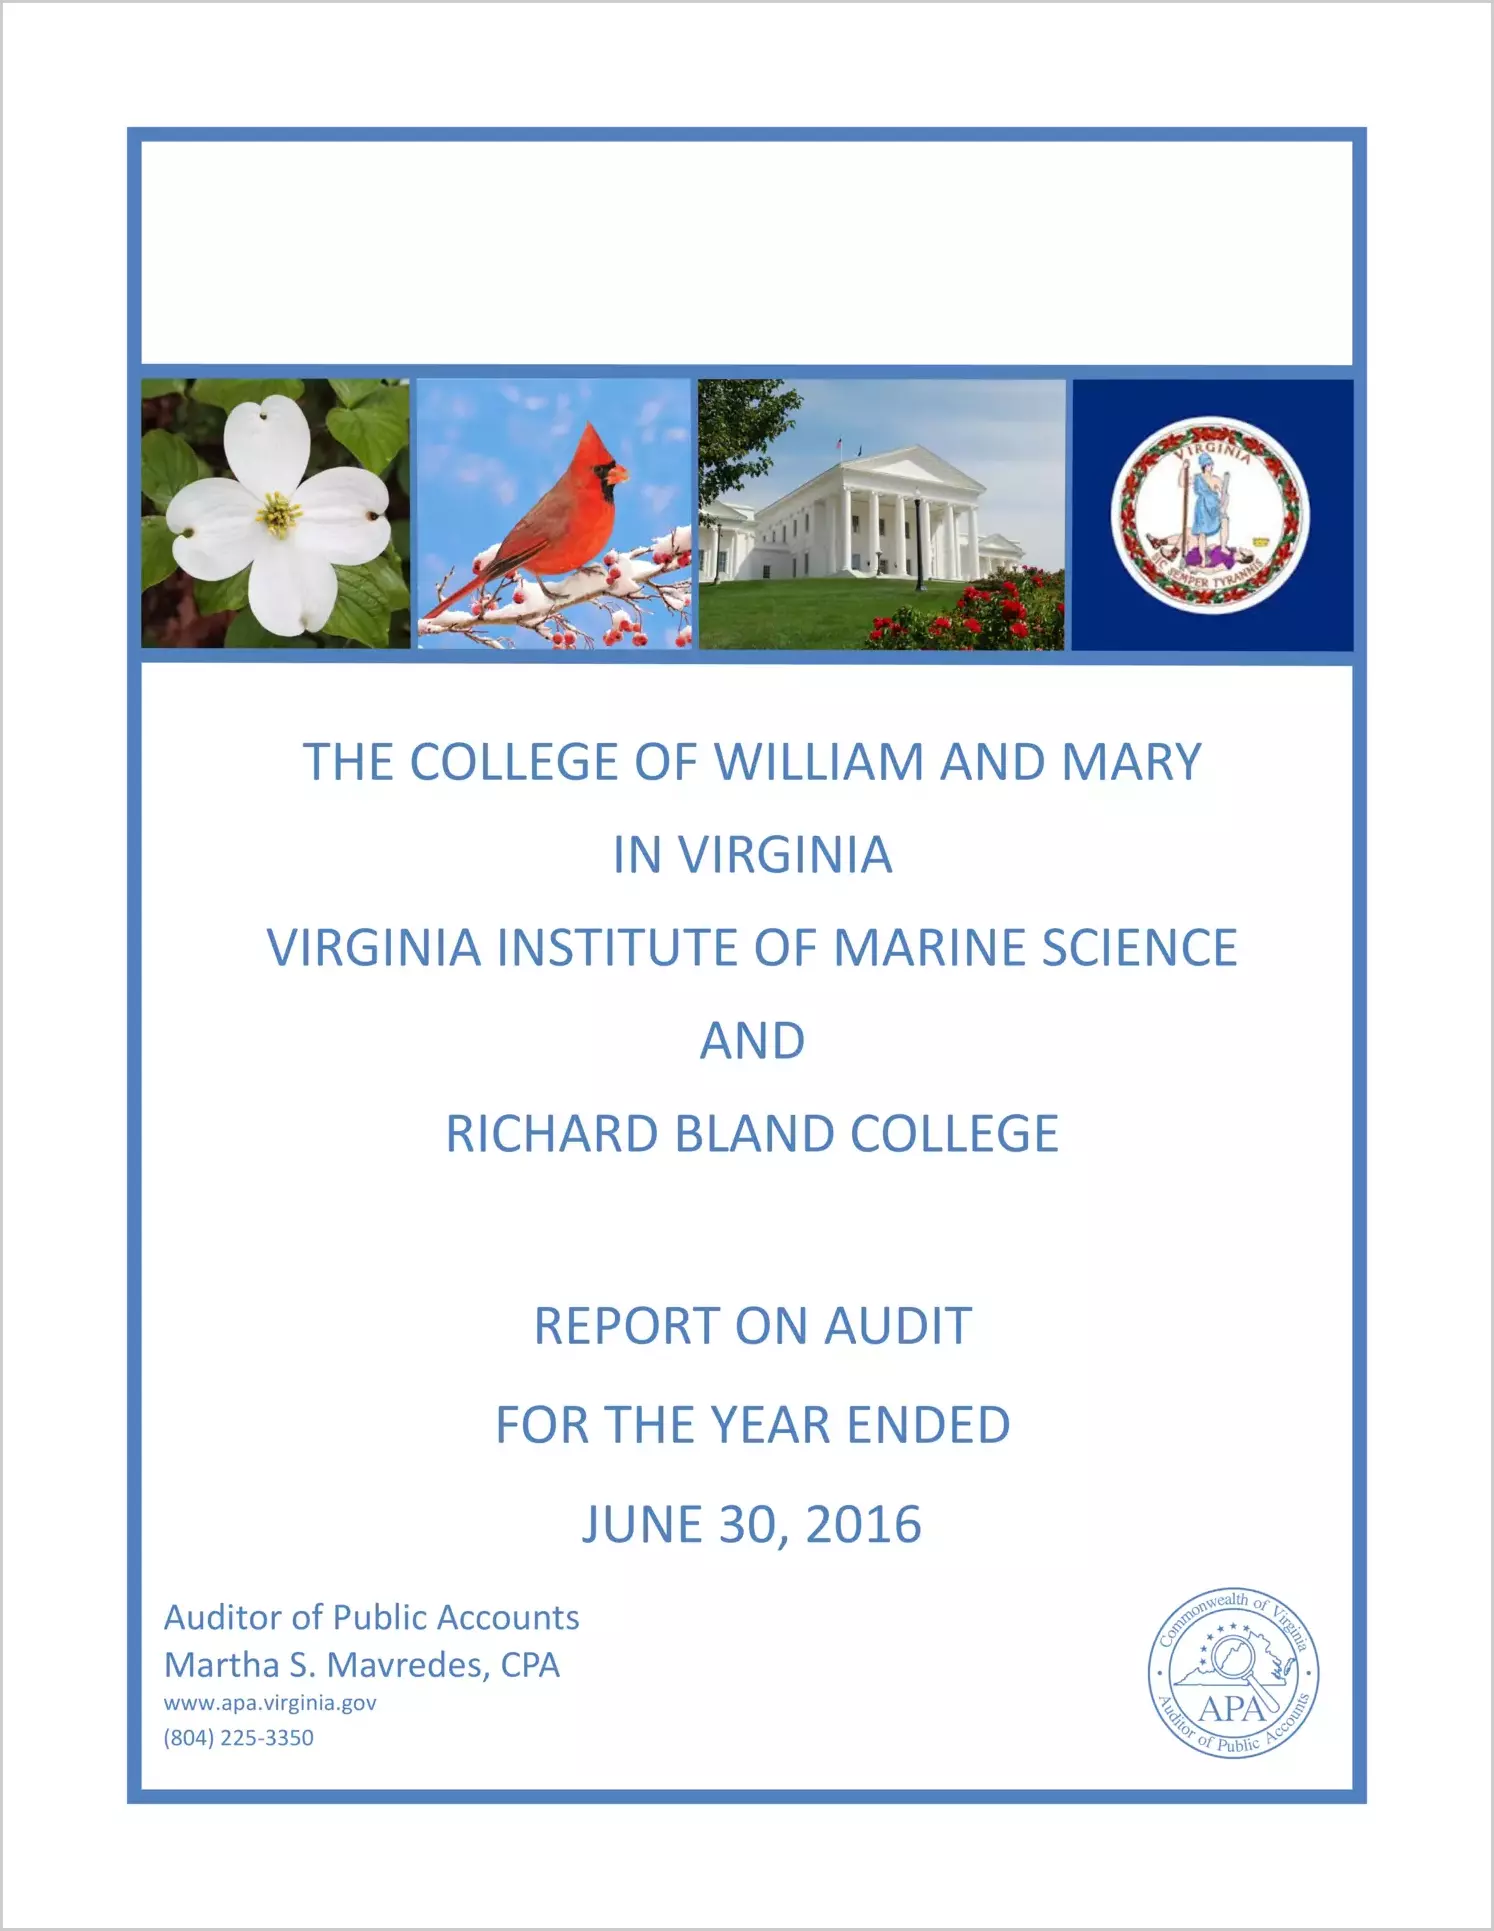 The College of William and Mary in Virginia, Virginia Institute of Marine Science, and Richard Bland College for the year ended June 30, 2016